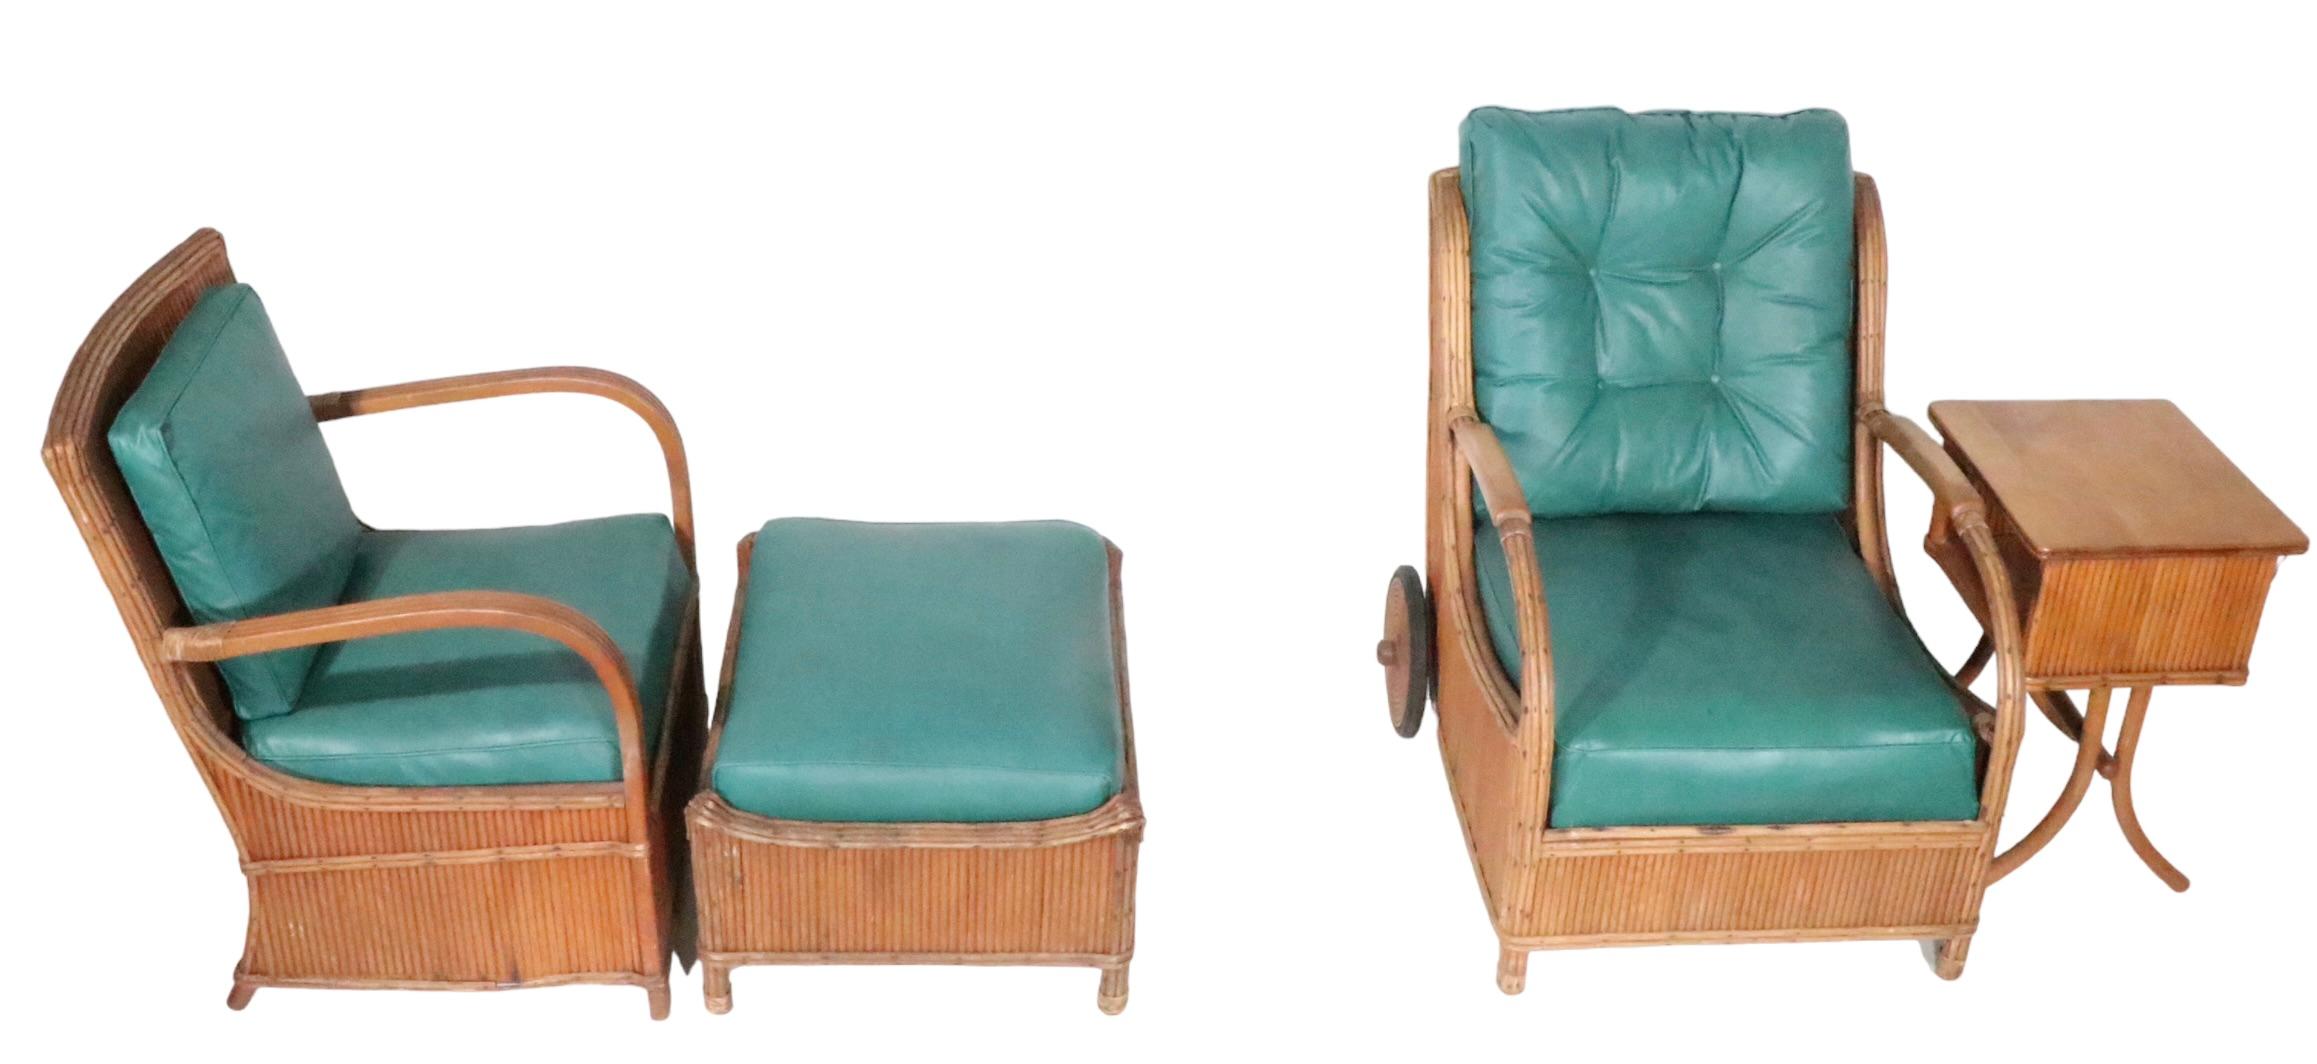 Four Piece Group of Art Deco Rattan Pencil Reed Wicker by the American Chair Co. For Sale 2